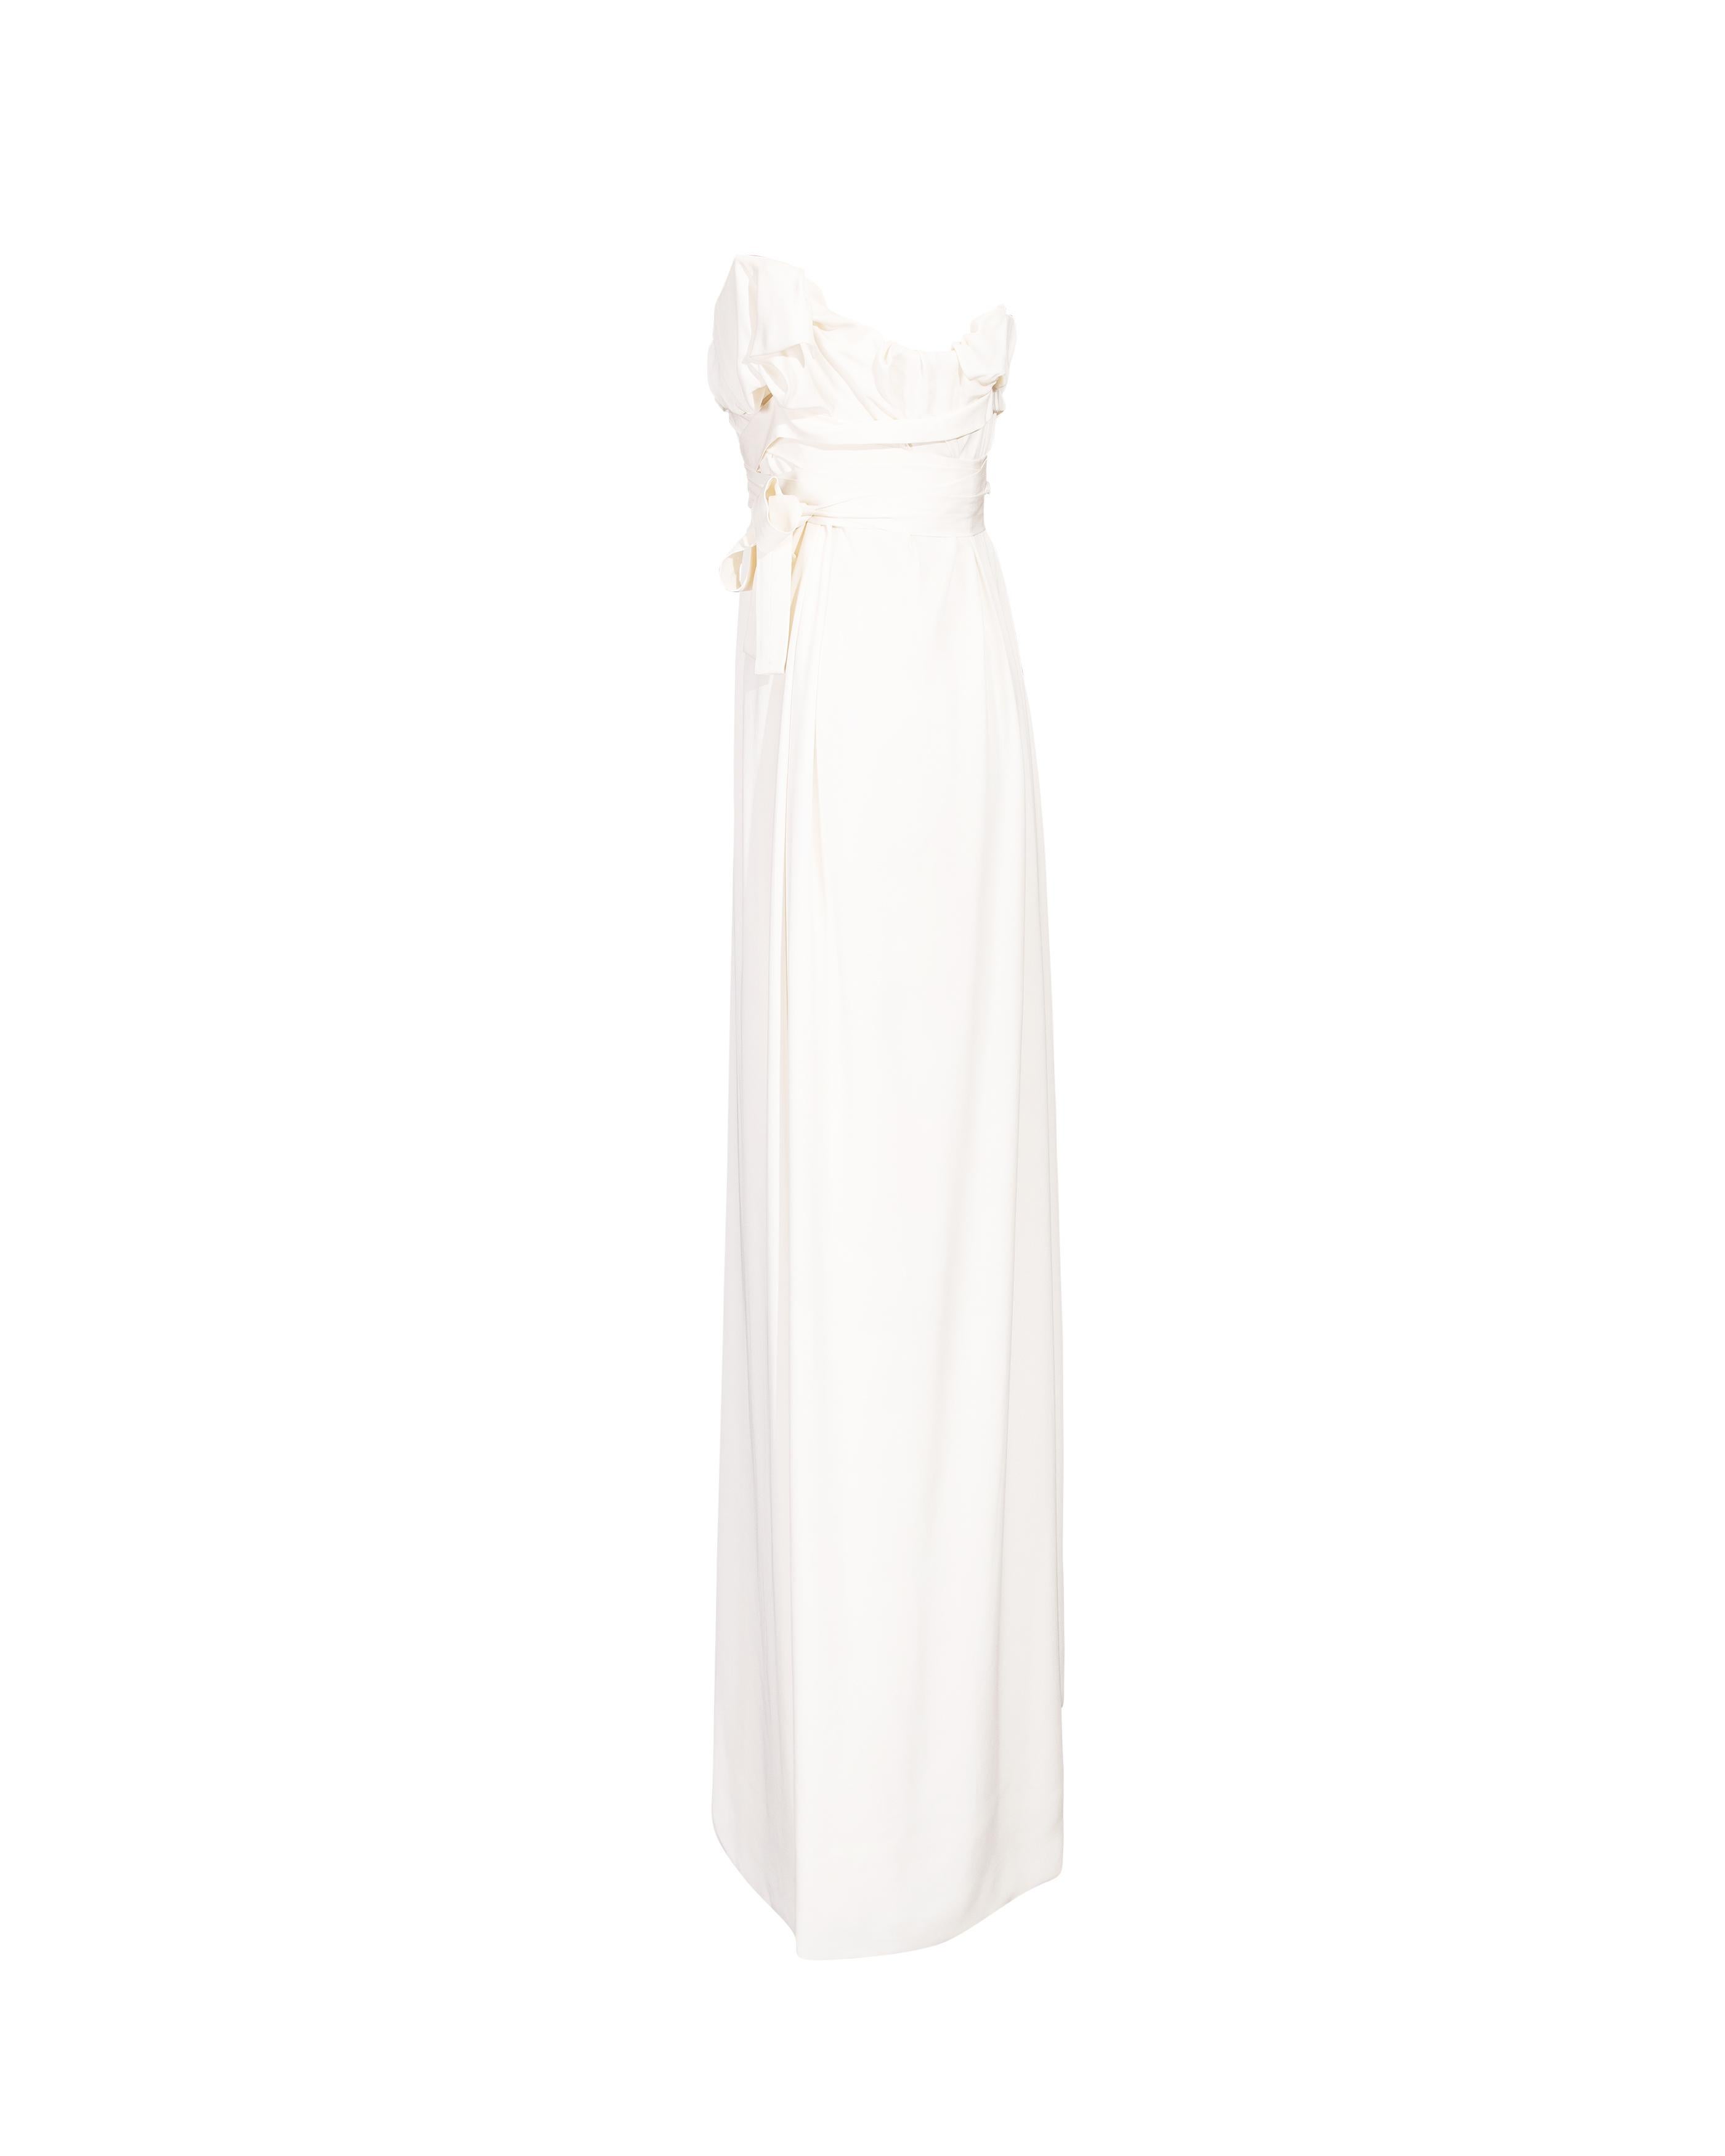 S/S 2014 Vivienne Westwood White Strapless Silk Drape Gown In Excellent Condition In North Hollywood, CA